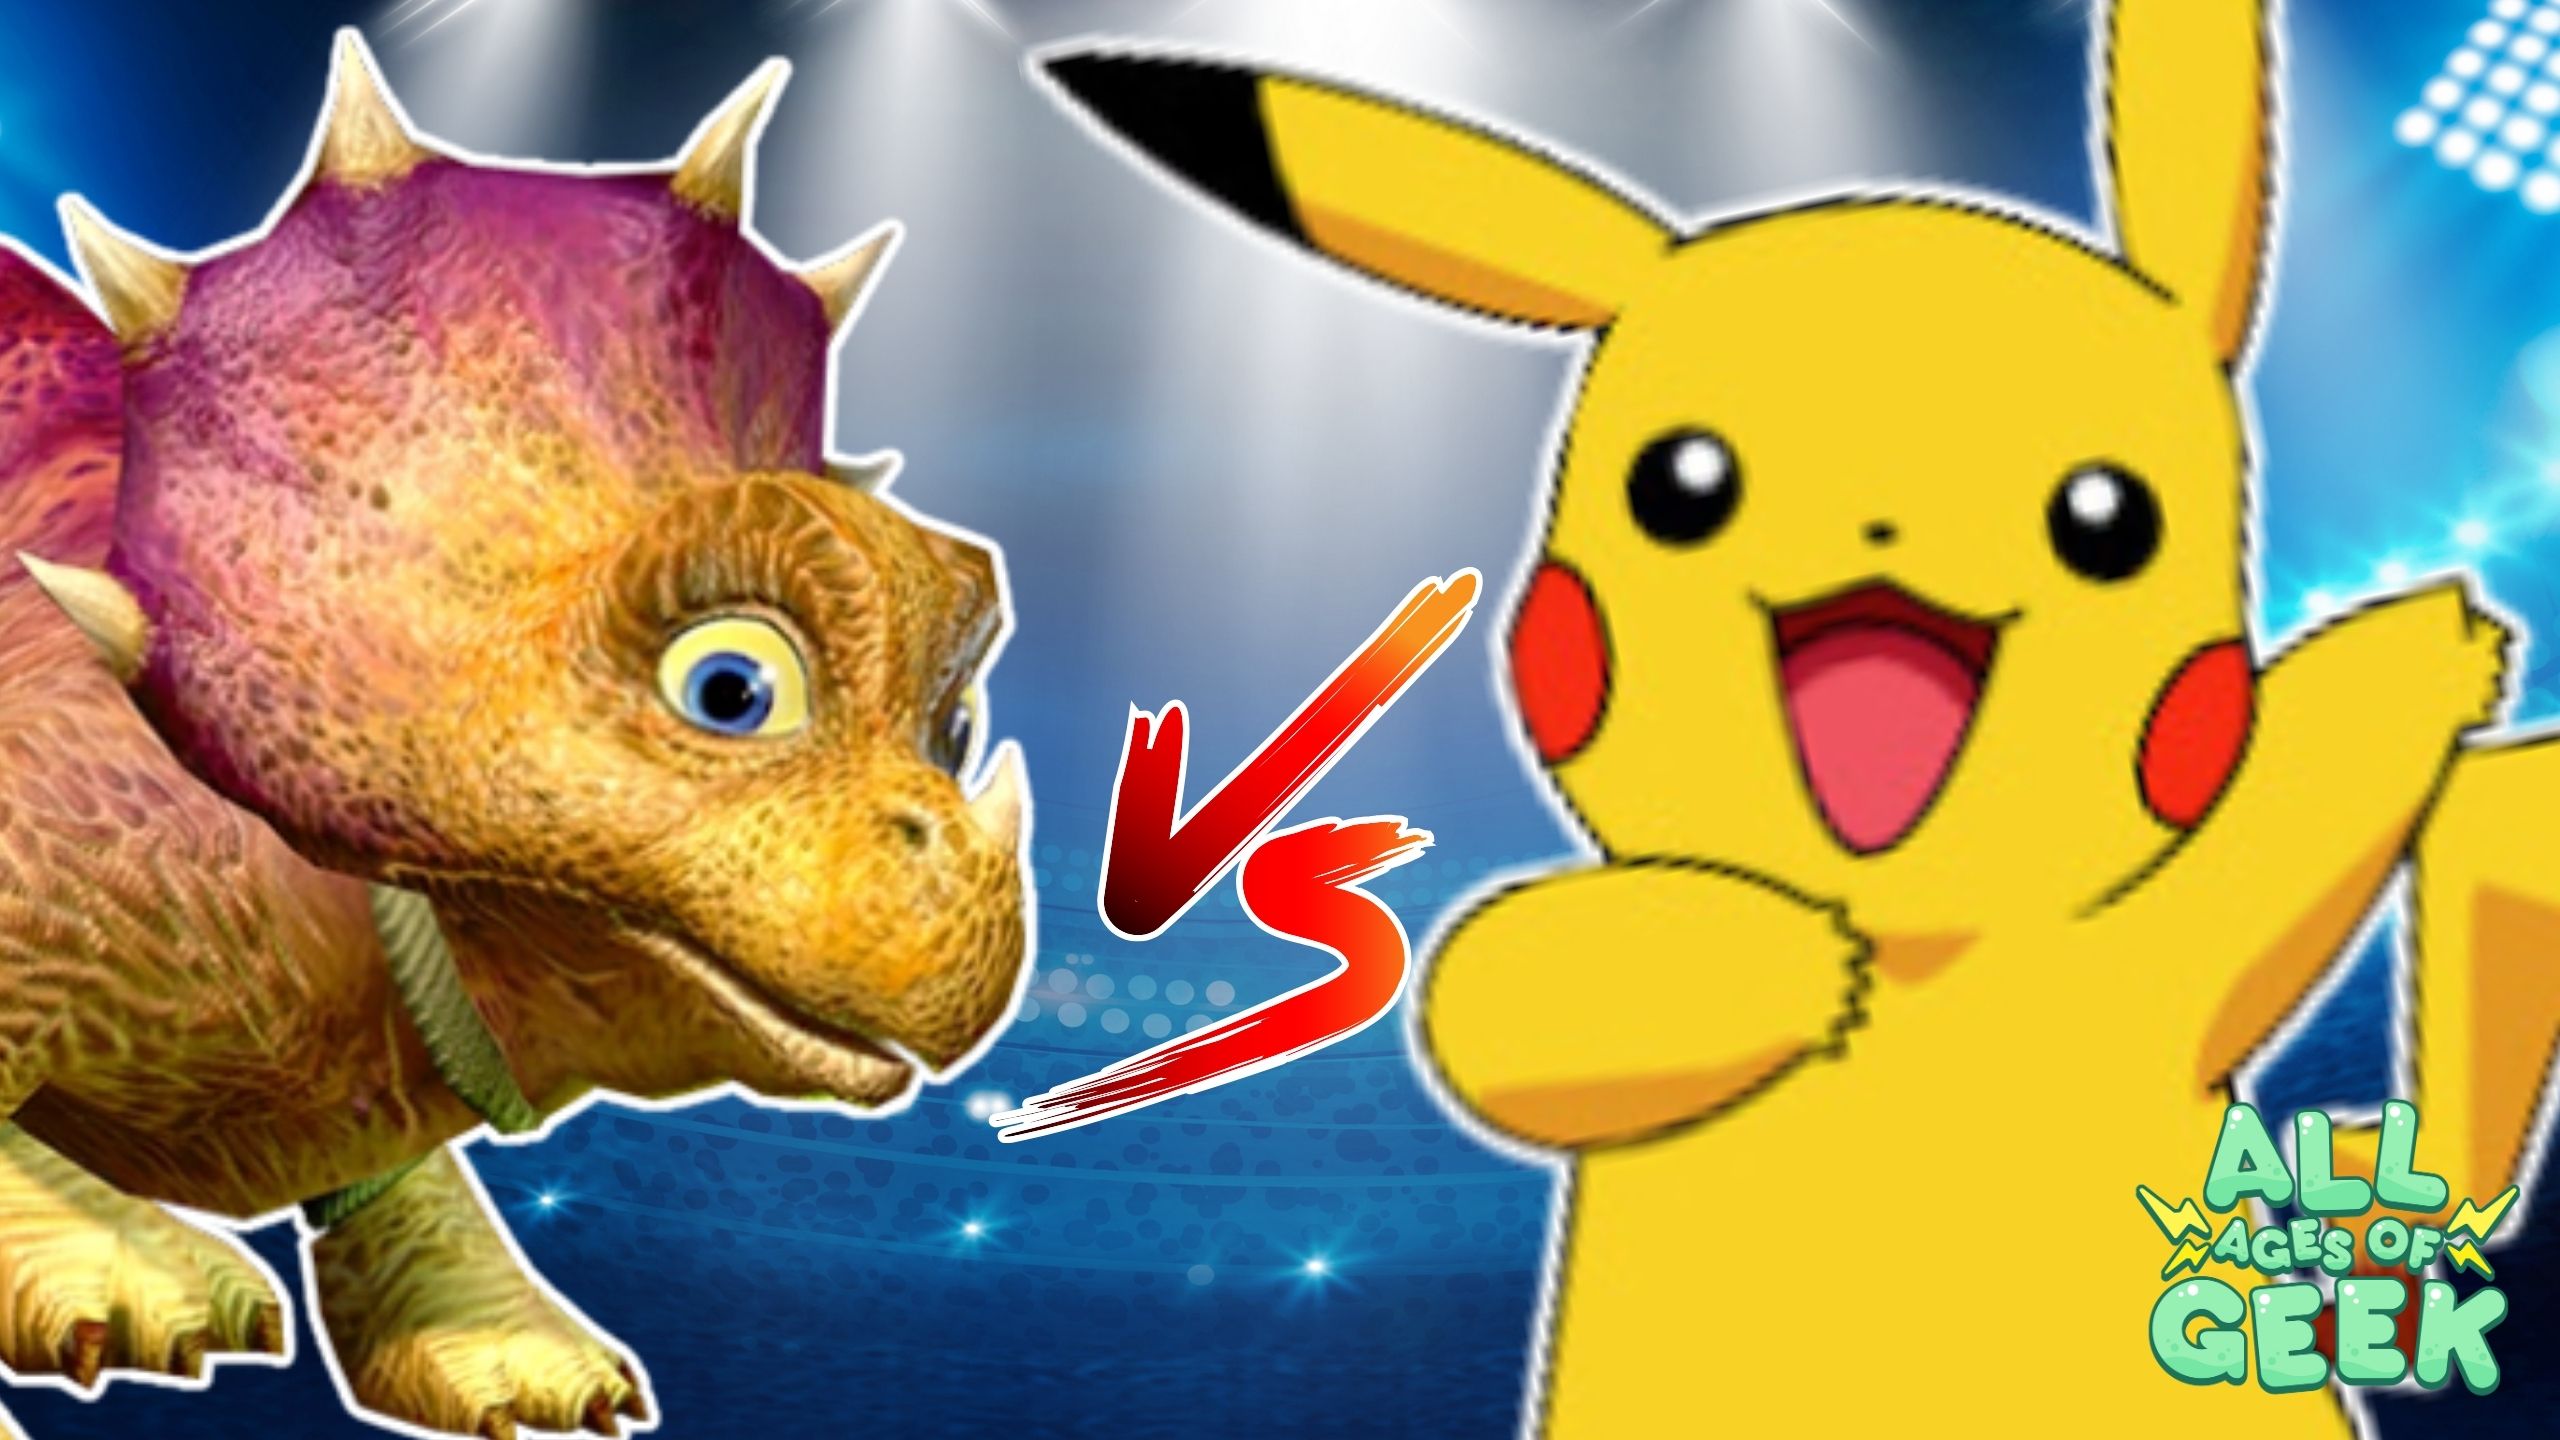 Tricky, the dinosaur from Star Fox Adventures, facing off against Pikachu from Pokémon in an arena setting with spotlights. The image features a 'VS' symbol between the two characters and the All Ages of Geek logo in the bottom right corner